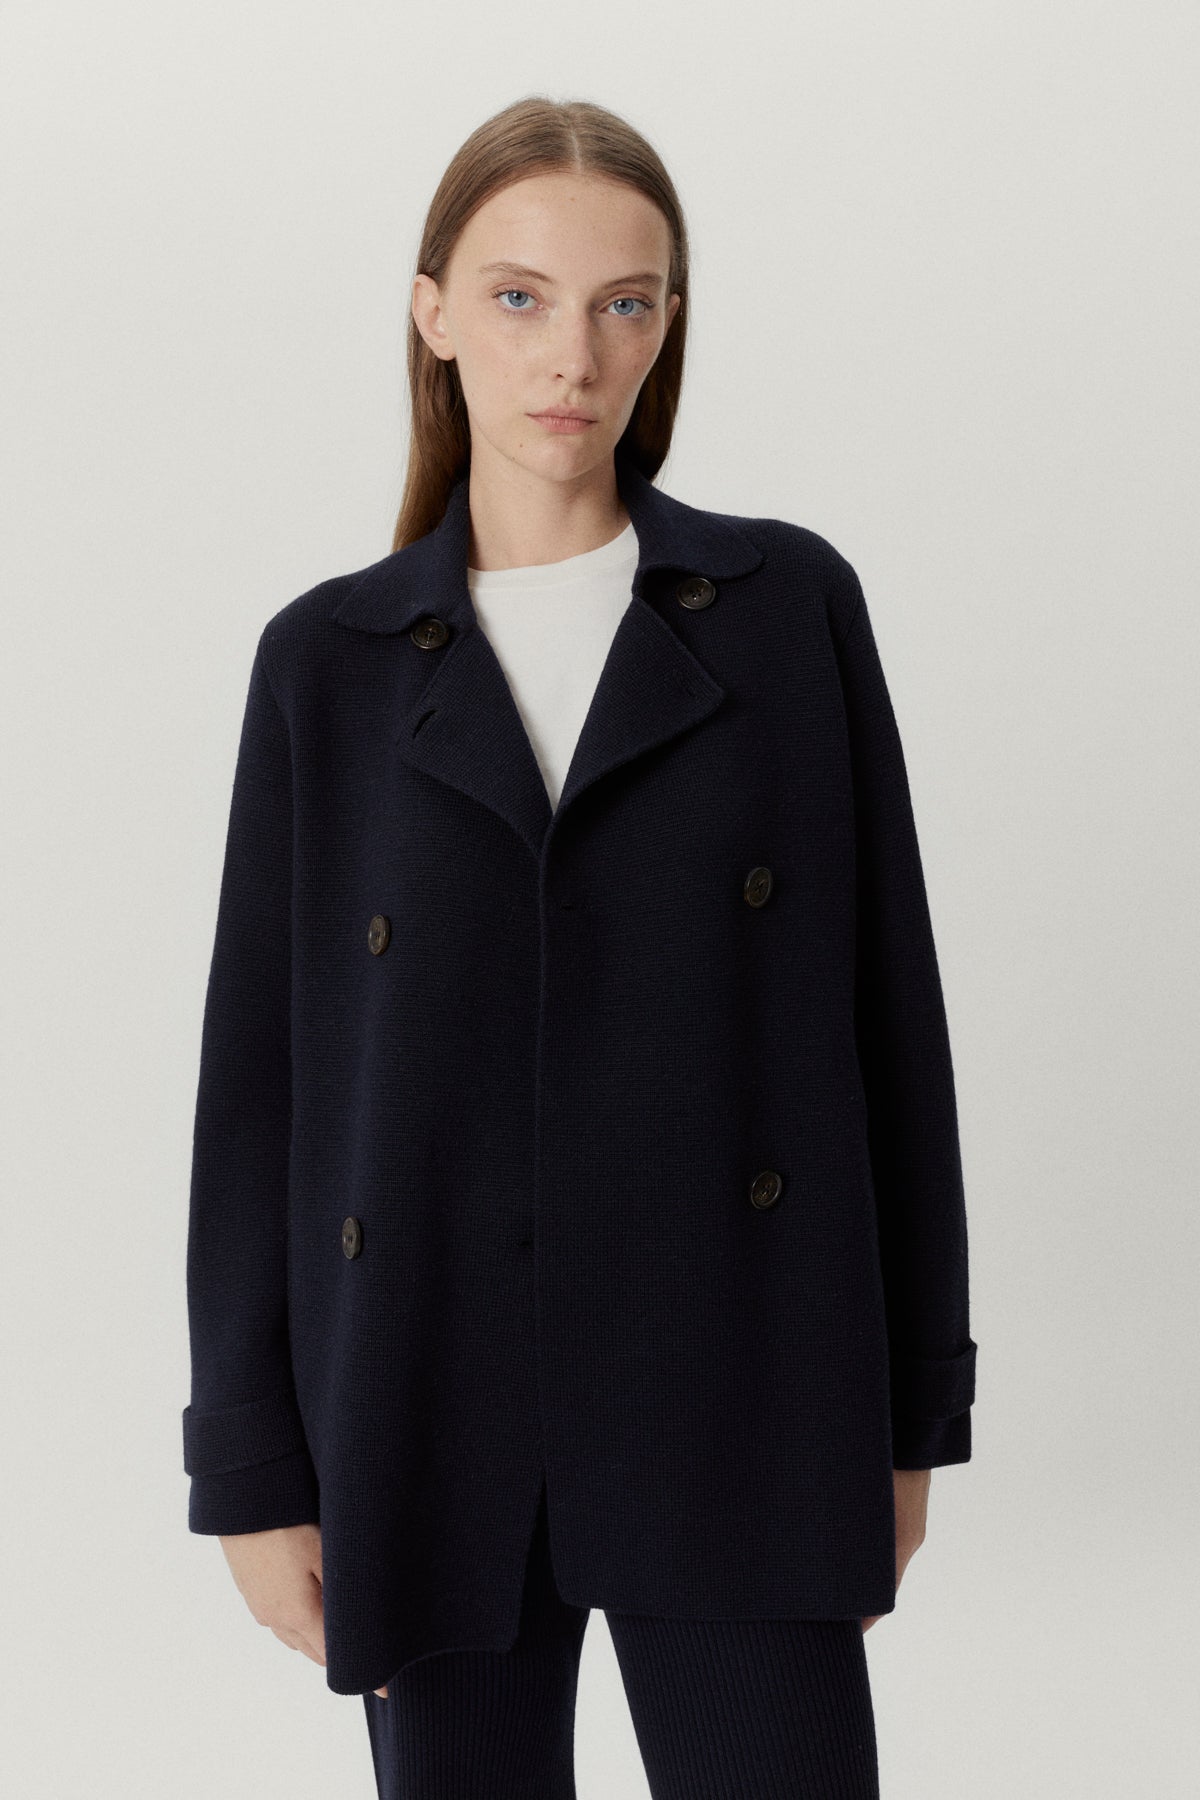 Oxford Blue | The Merino Wool Double Breasted Jacket